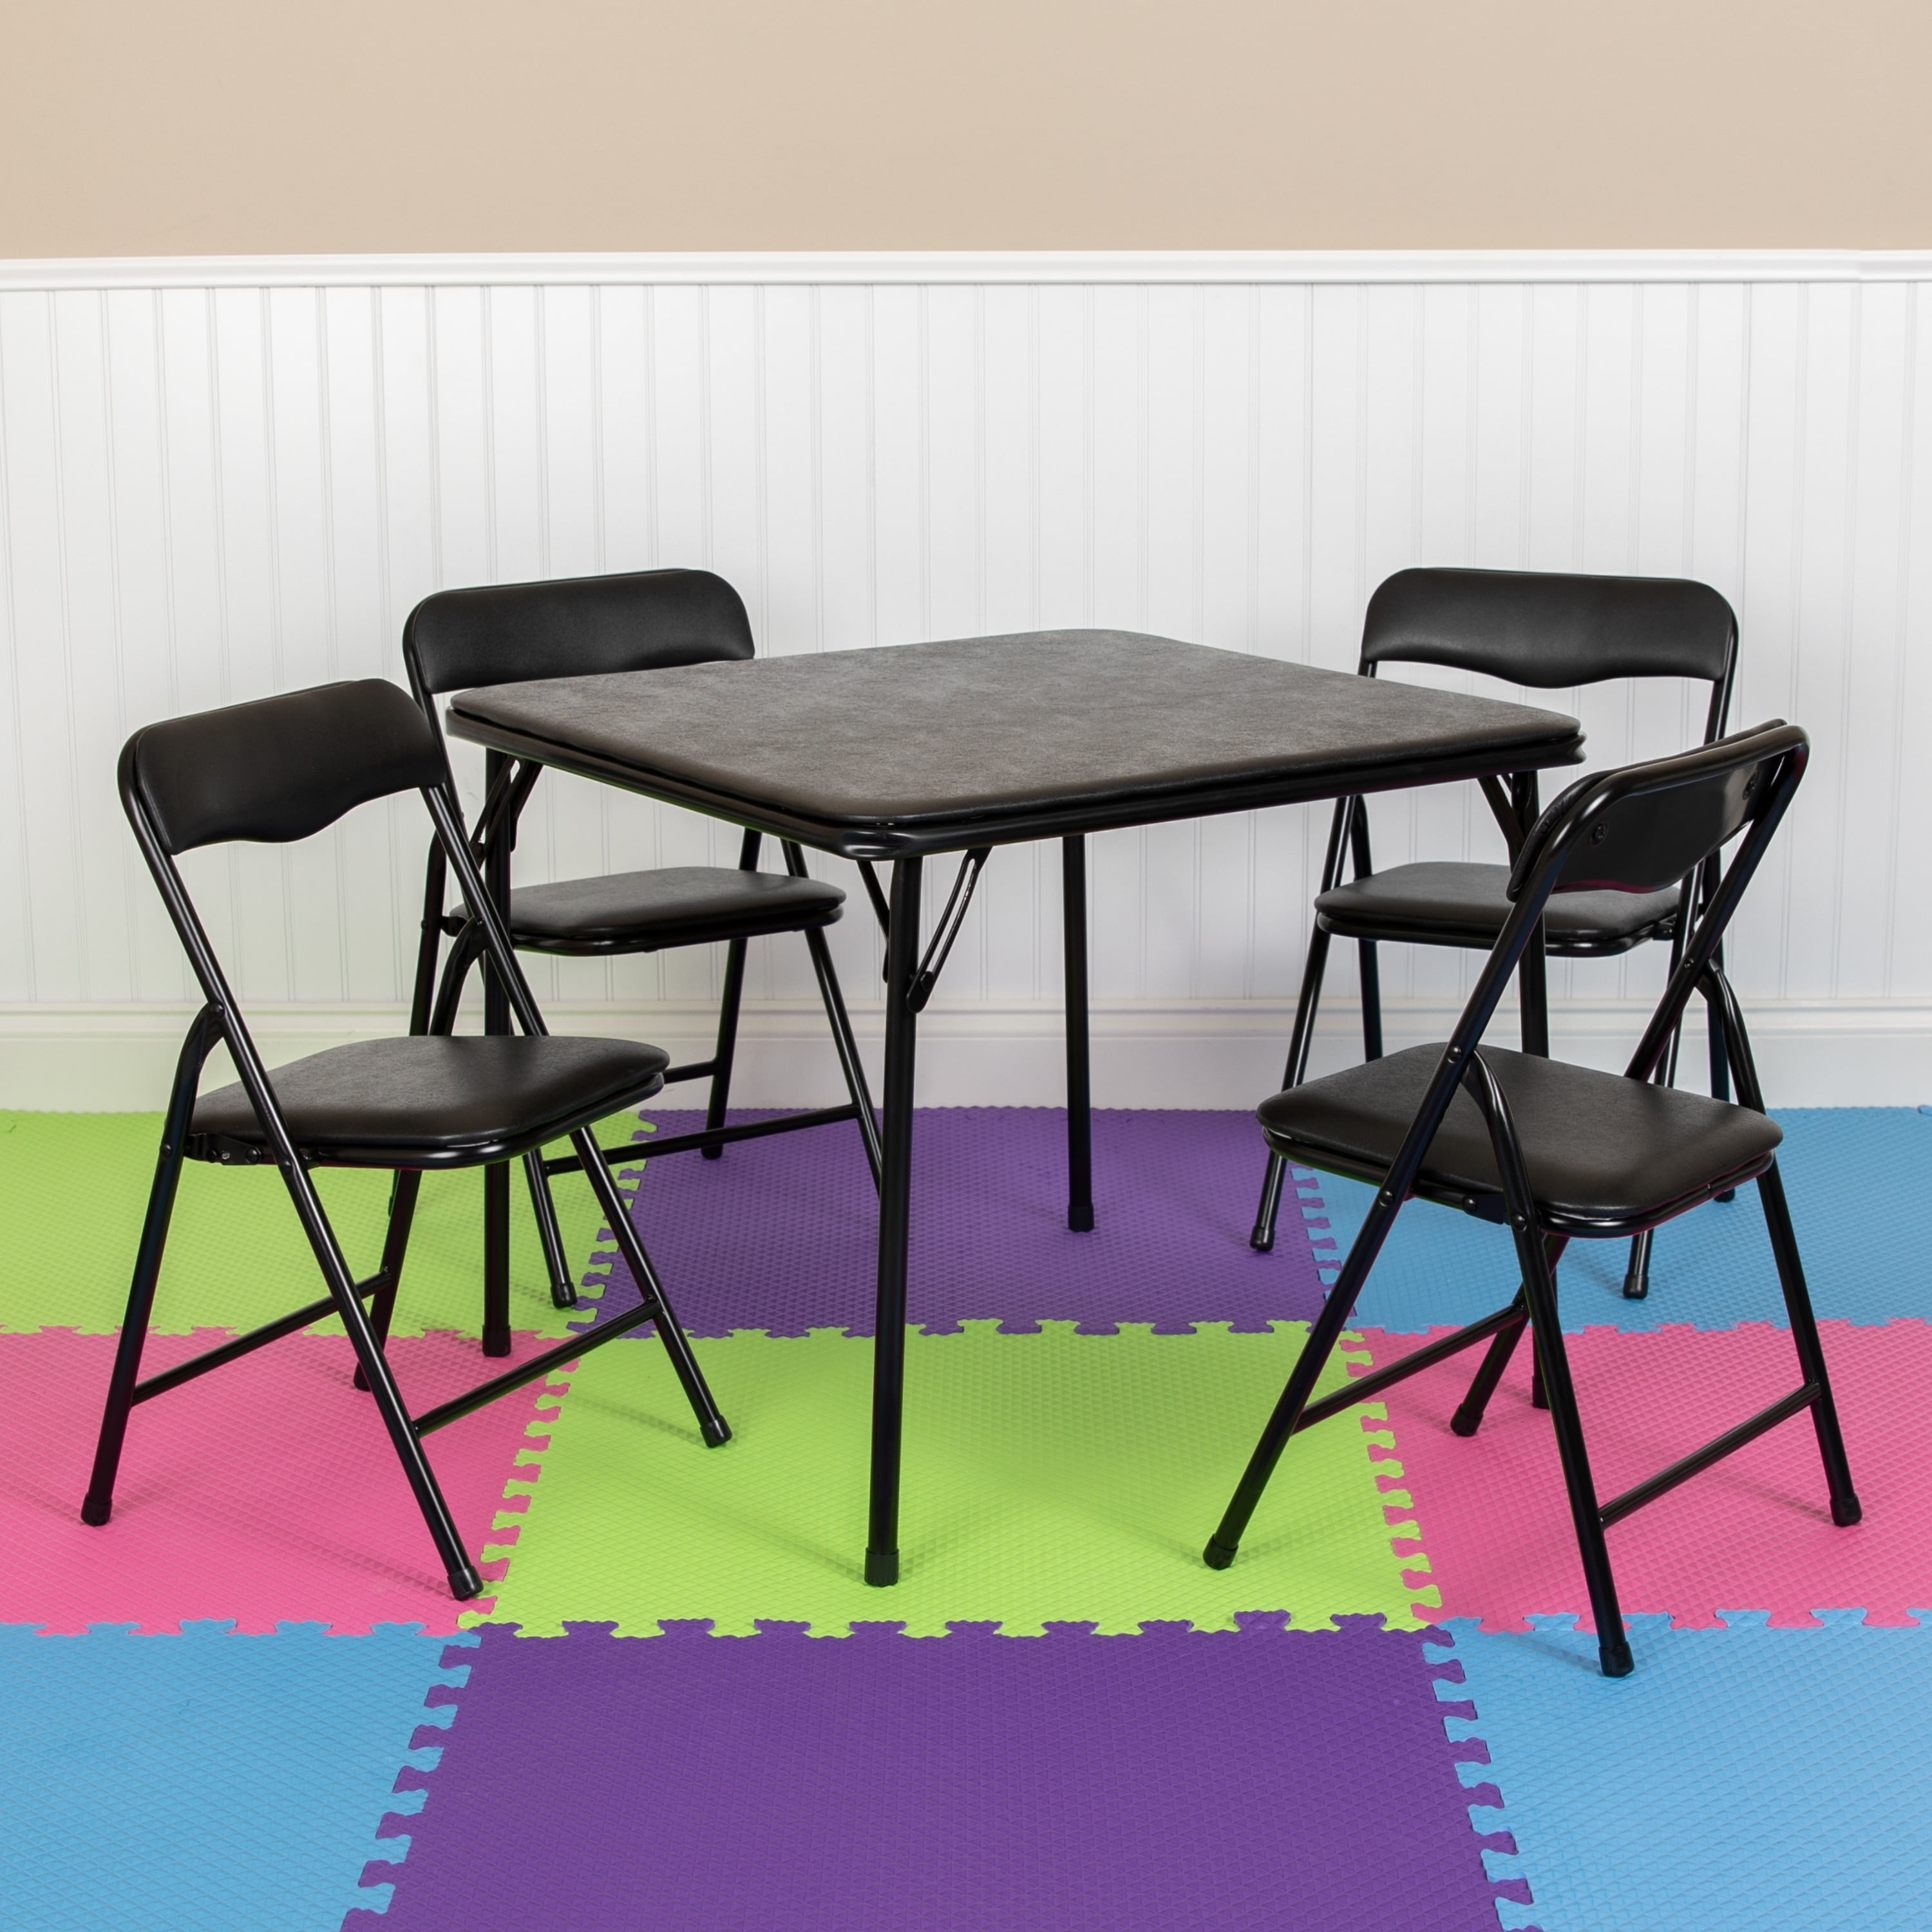 Lancaster Home Kids 5 Piece Folding Table and Chair Set - Kids Activity